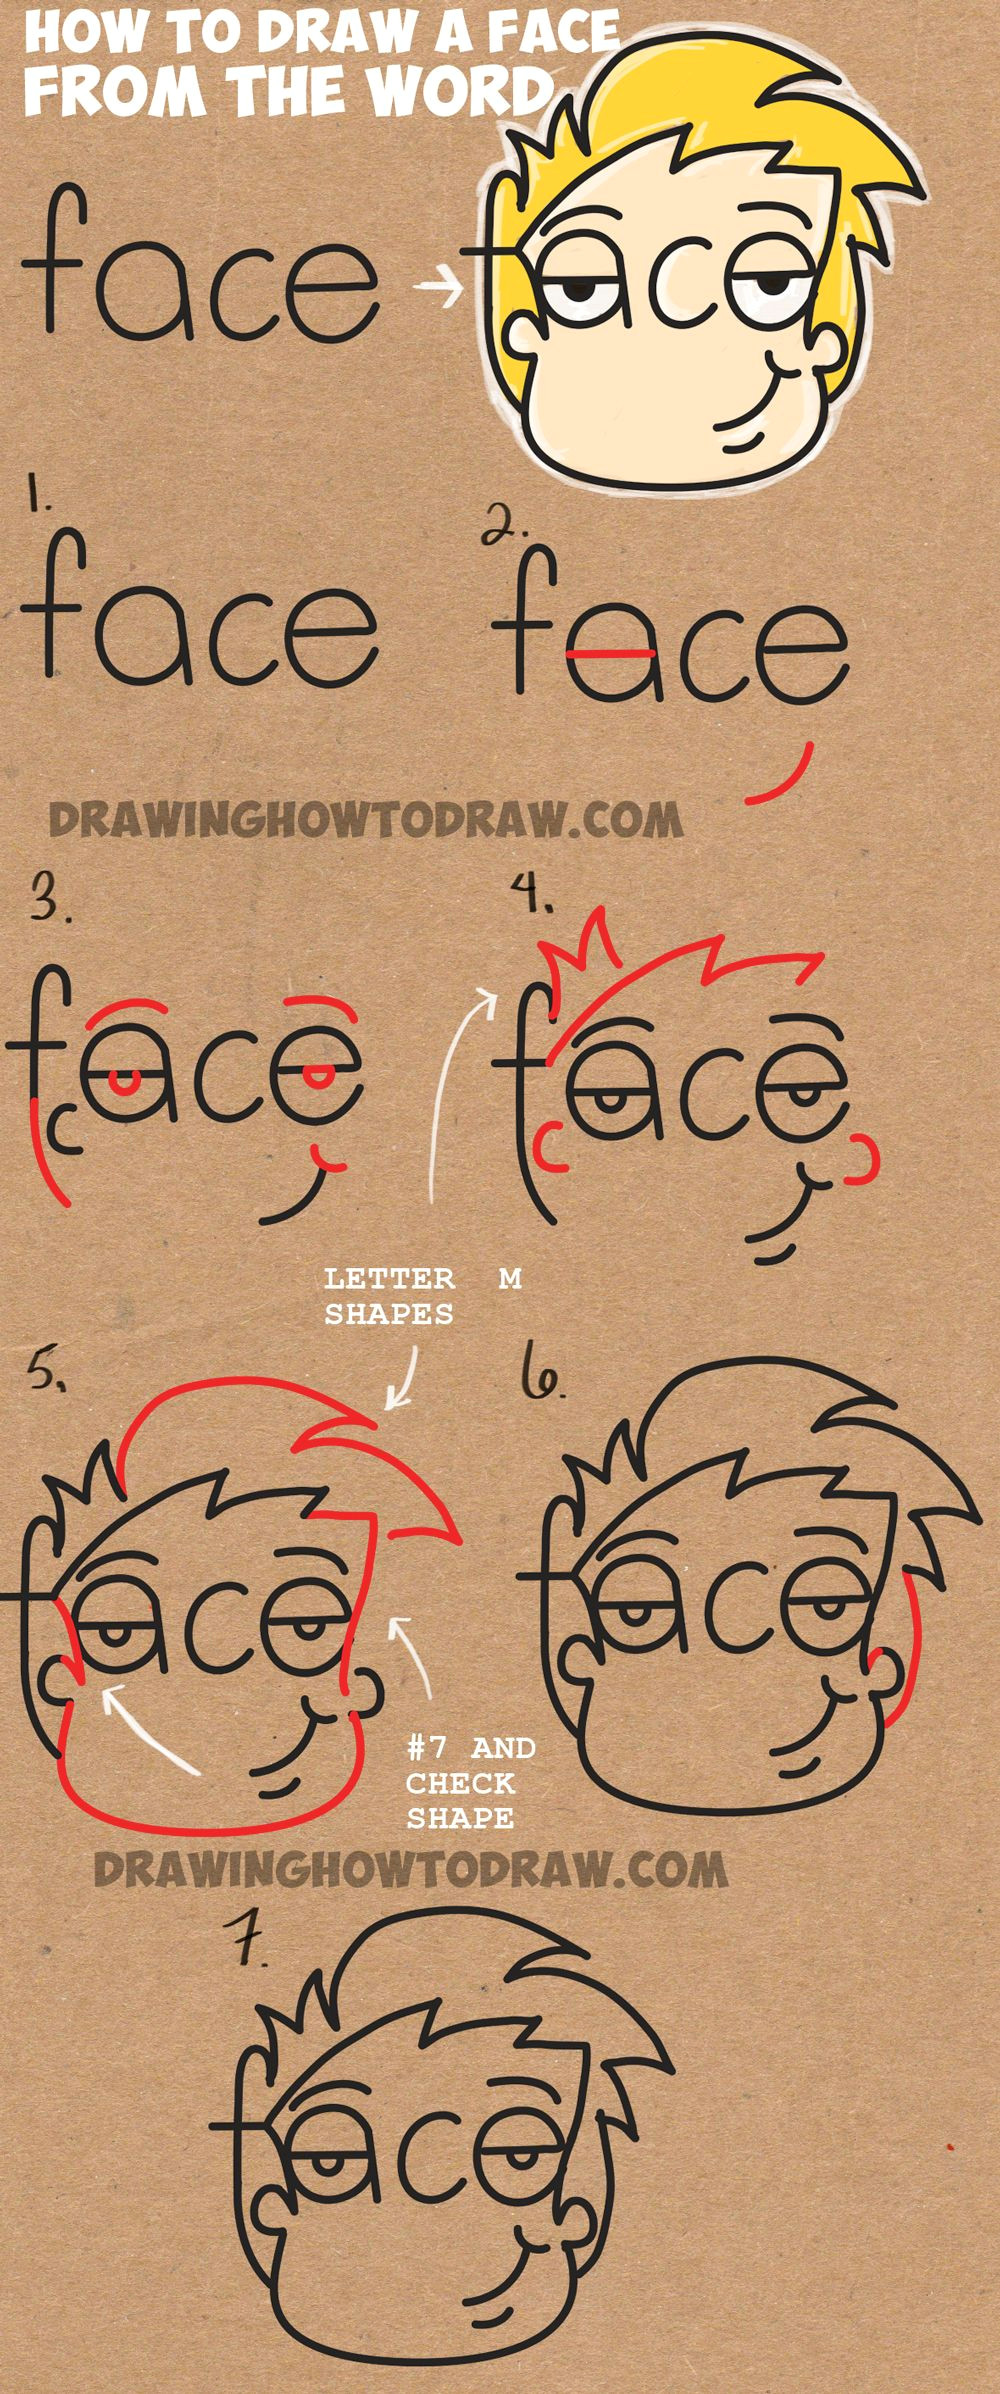 Drawing Cartoons From Words How to Draw Cartoon Faces From the Word Face Easy Step by Step